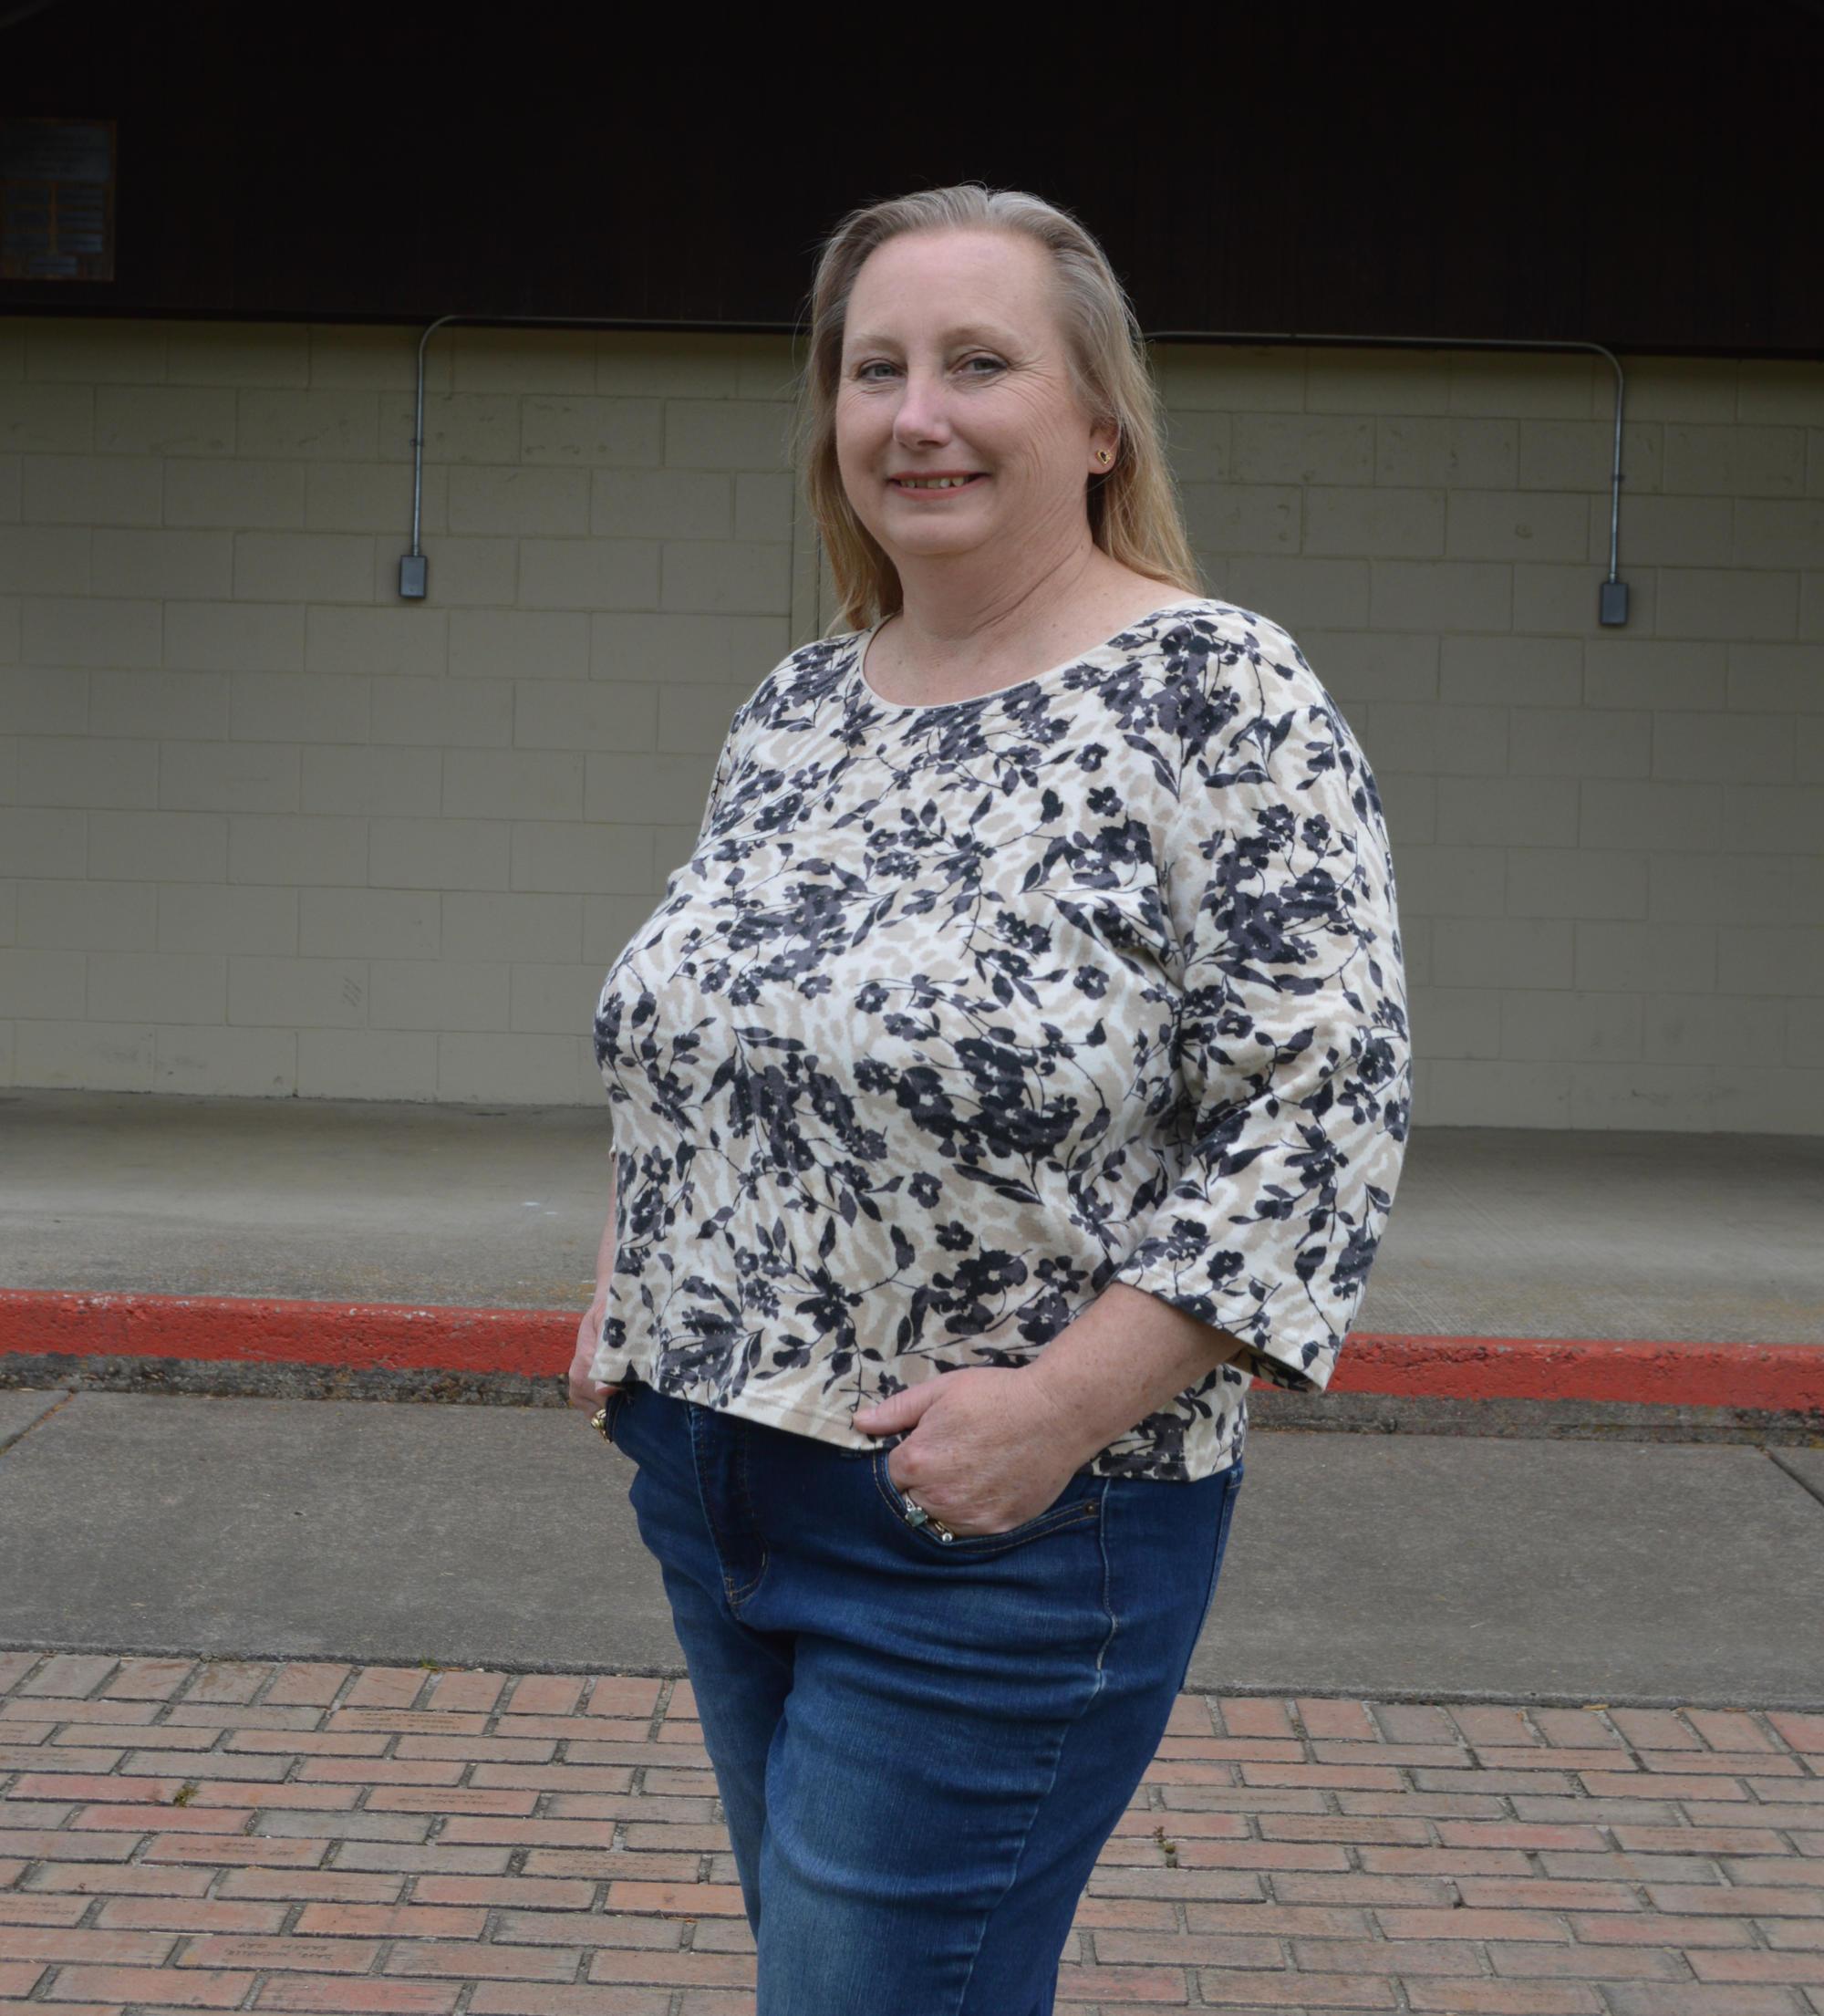 Sherrie Deaton is a 4-H leader for three Benton County clubs.